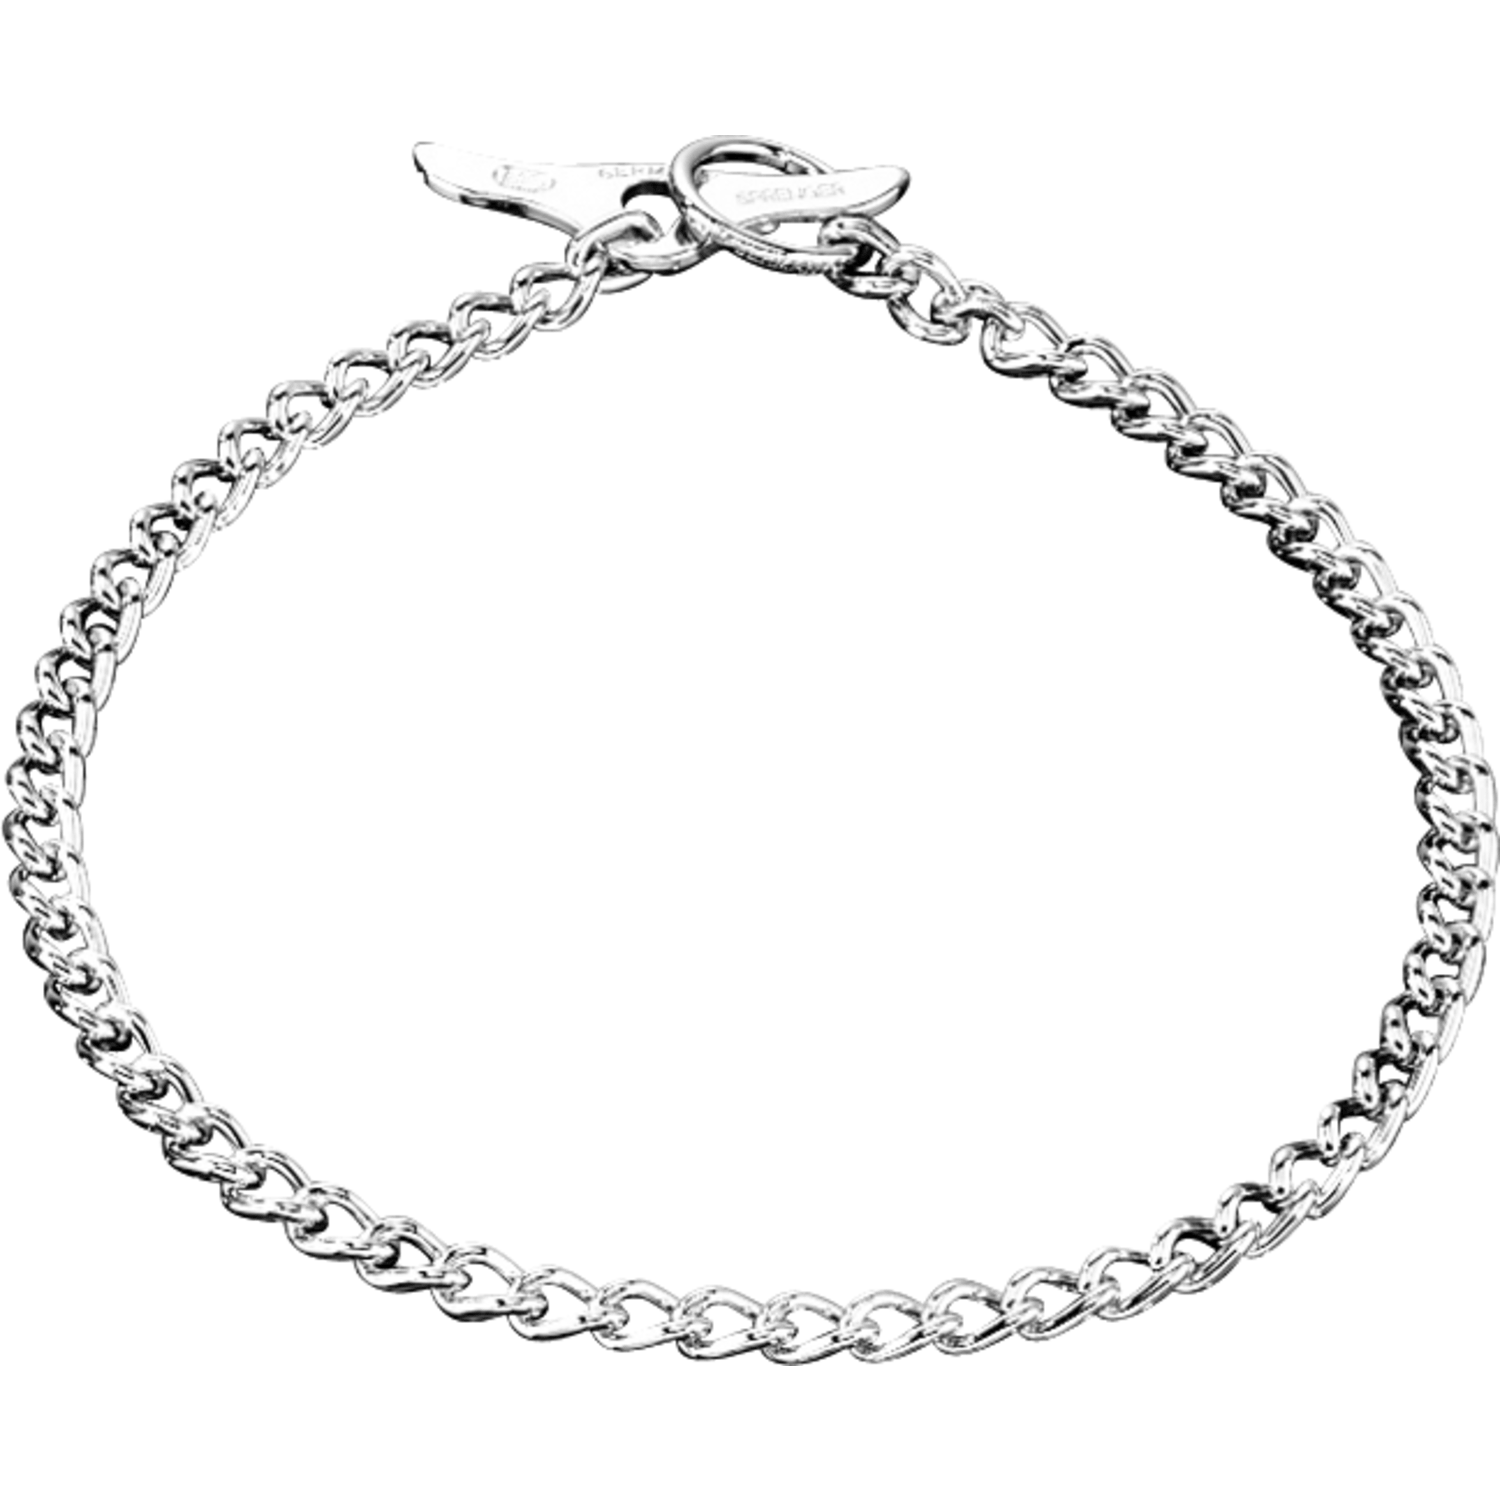 Round Chain Link Collar (Steel Chrome-Plated) - 2.5mm